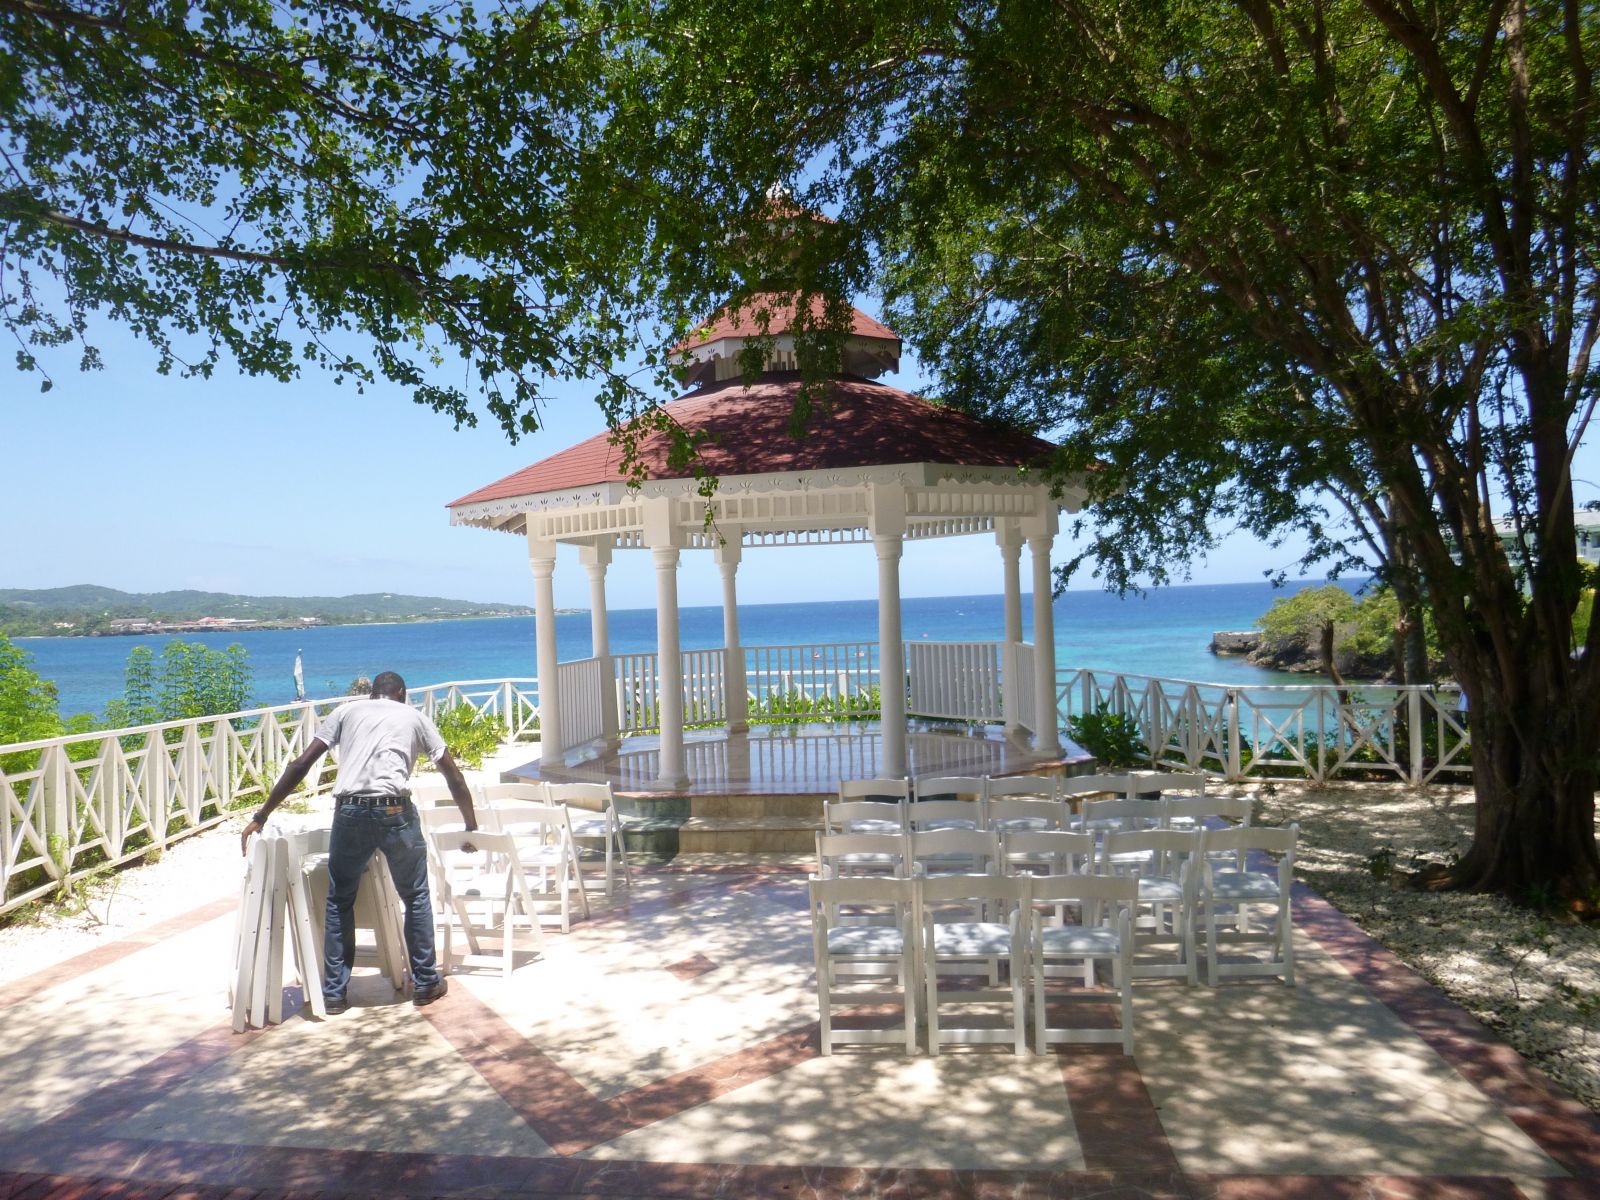 love the gazebo spot, I hated my wedding didn't happen there :(